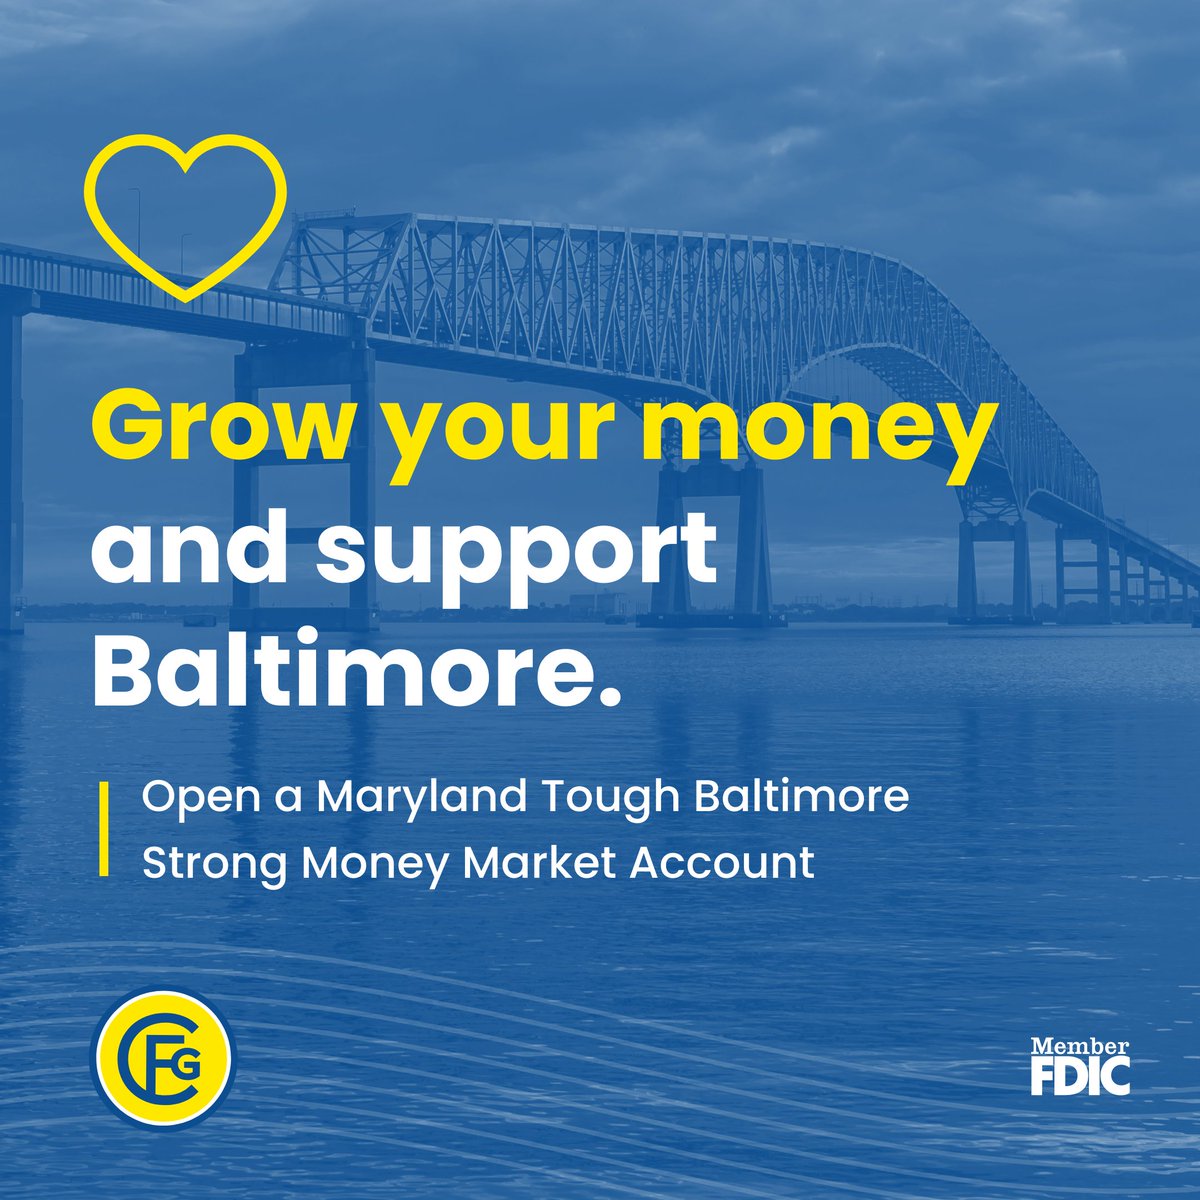 We created the Maryland Tough Baltimore Strong Money Market Account as a way for clients to support Key Bridge resilience efforts. Grow your money and donate a portion of your accrued interest to benefit recovery efforts – we’re matching up to $500,000! bit.ly/4duJ5zv